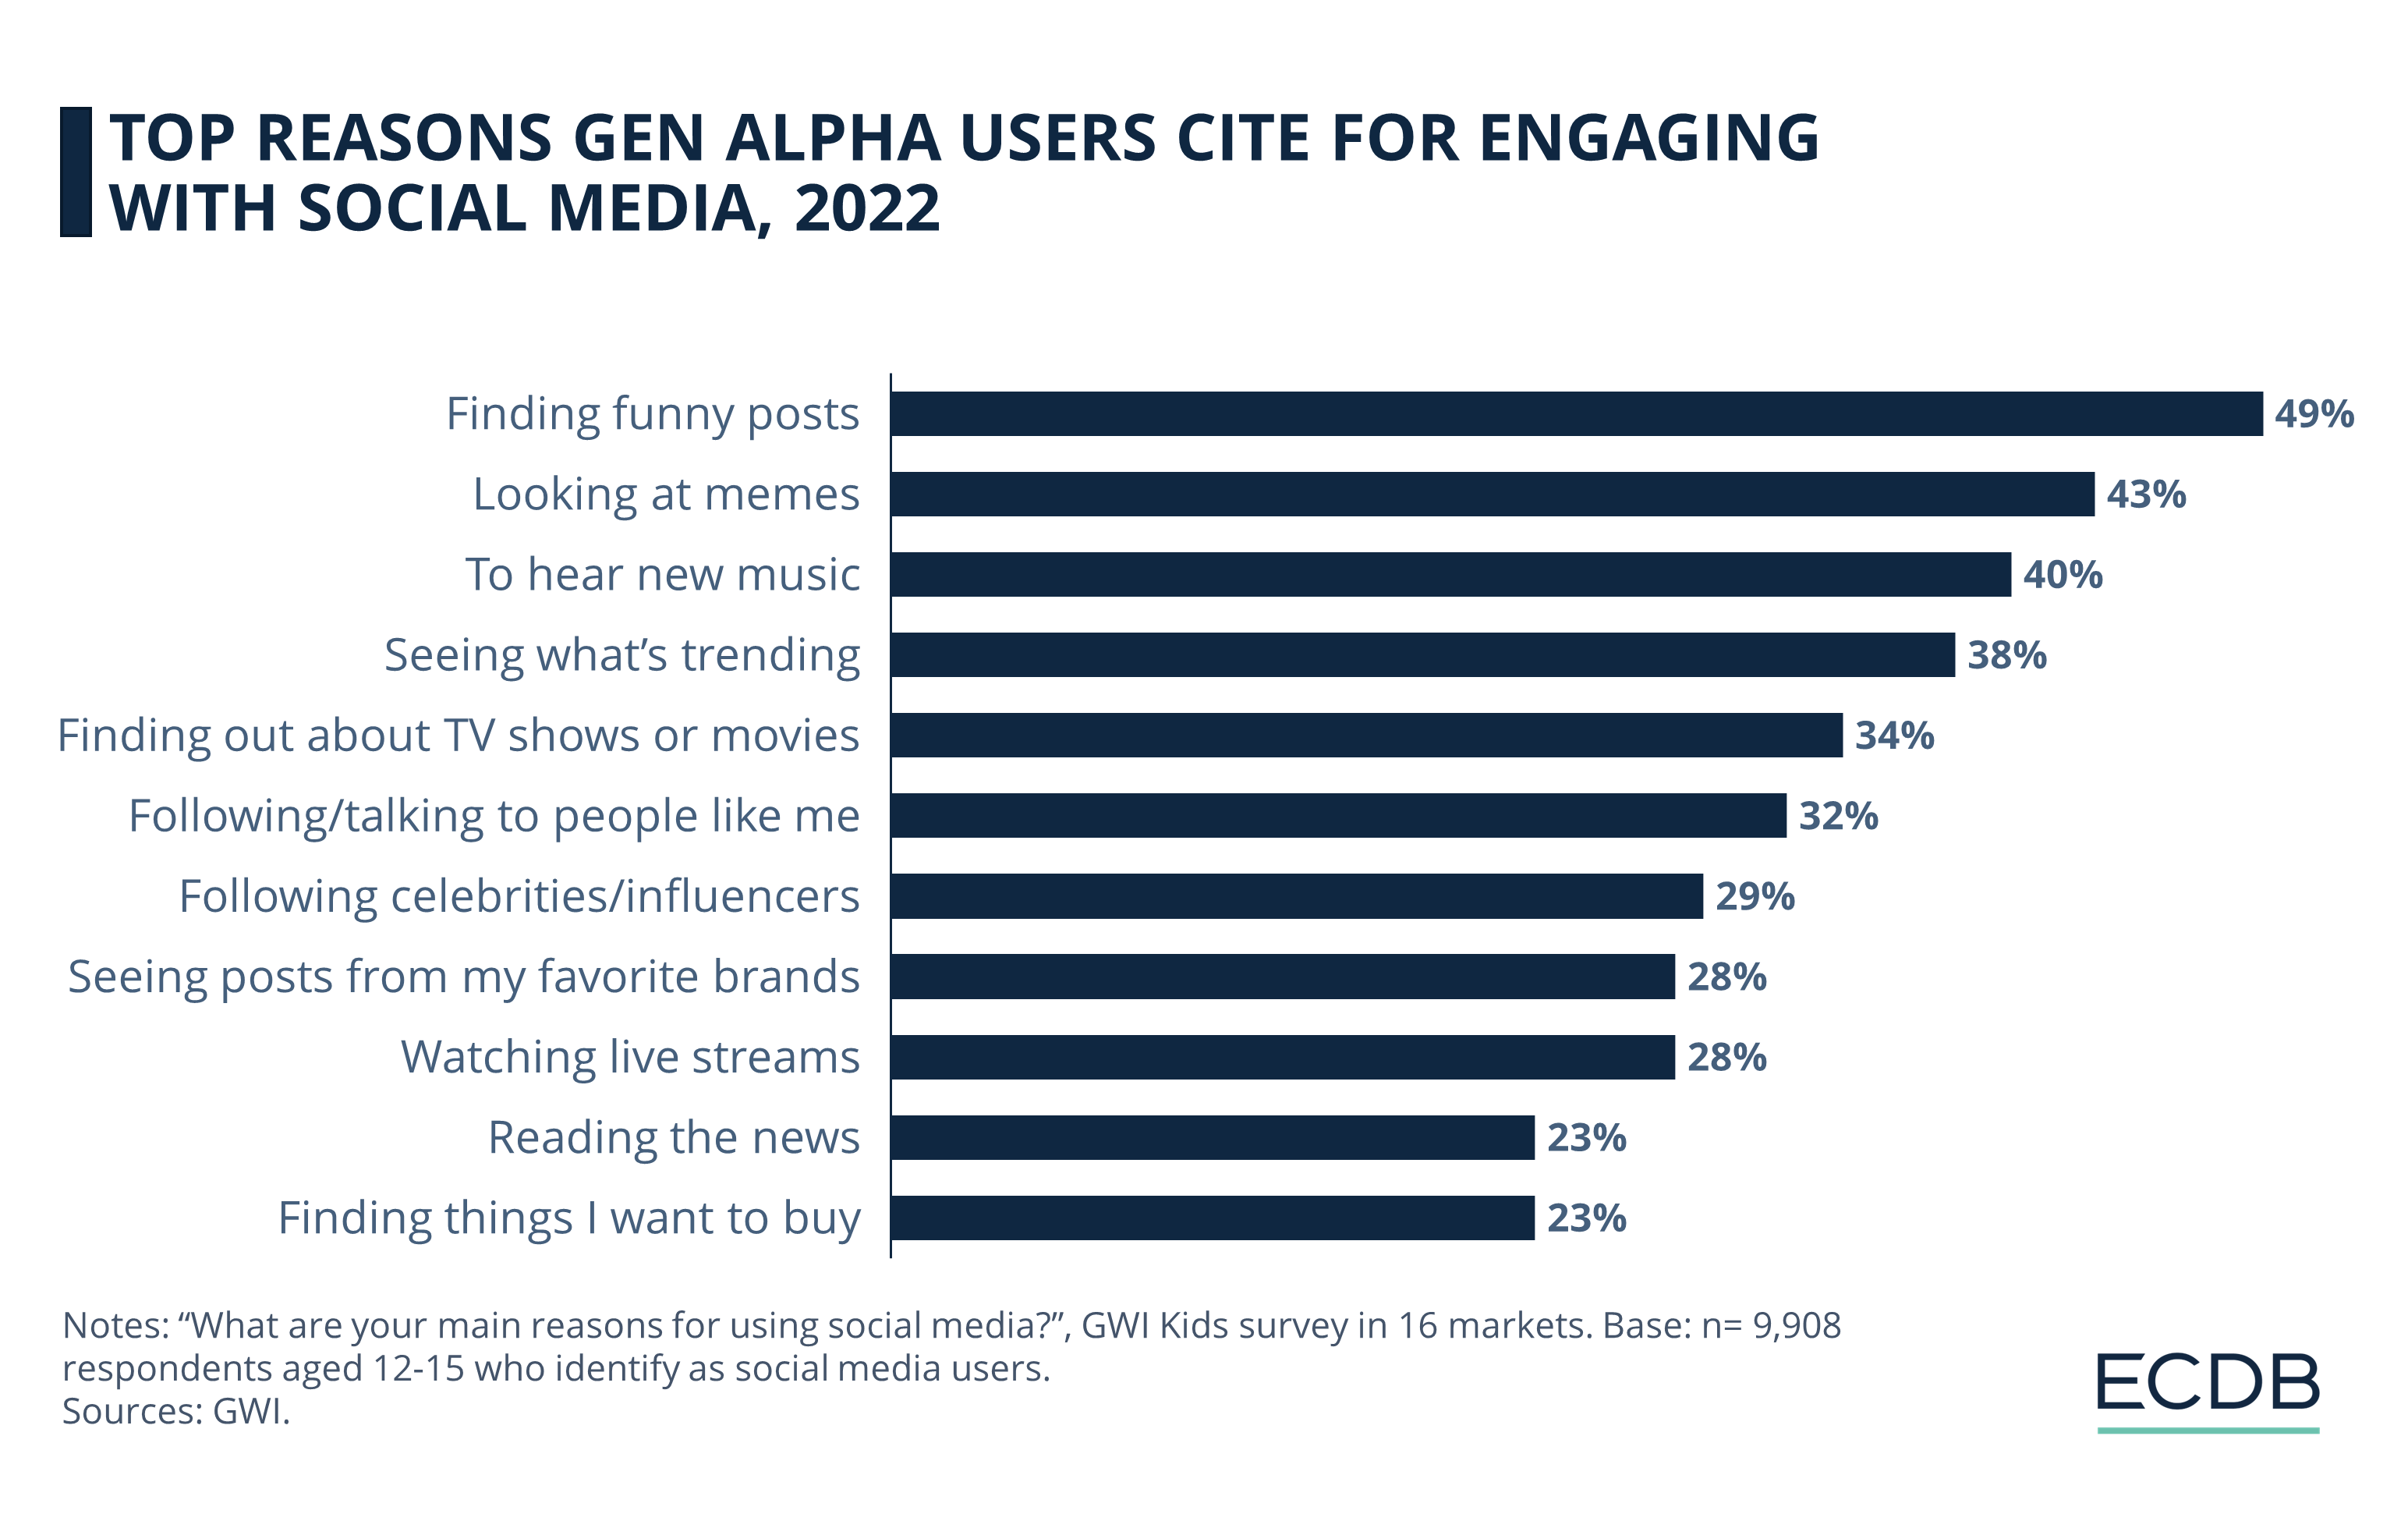 Top Reasons Gen Alpha Users Cite for Engaging With Social Media, 2022